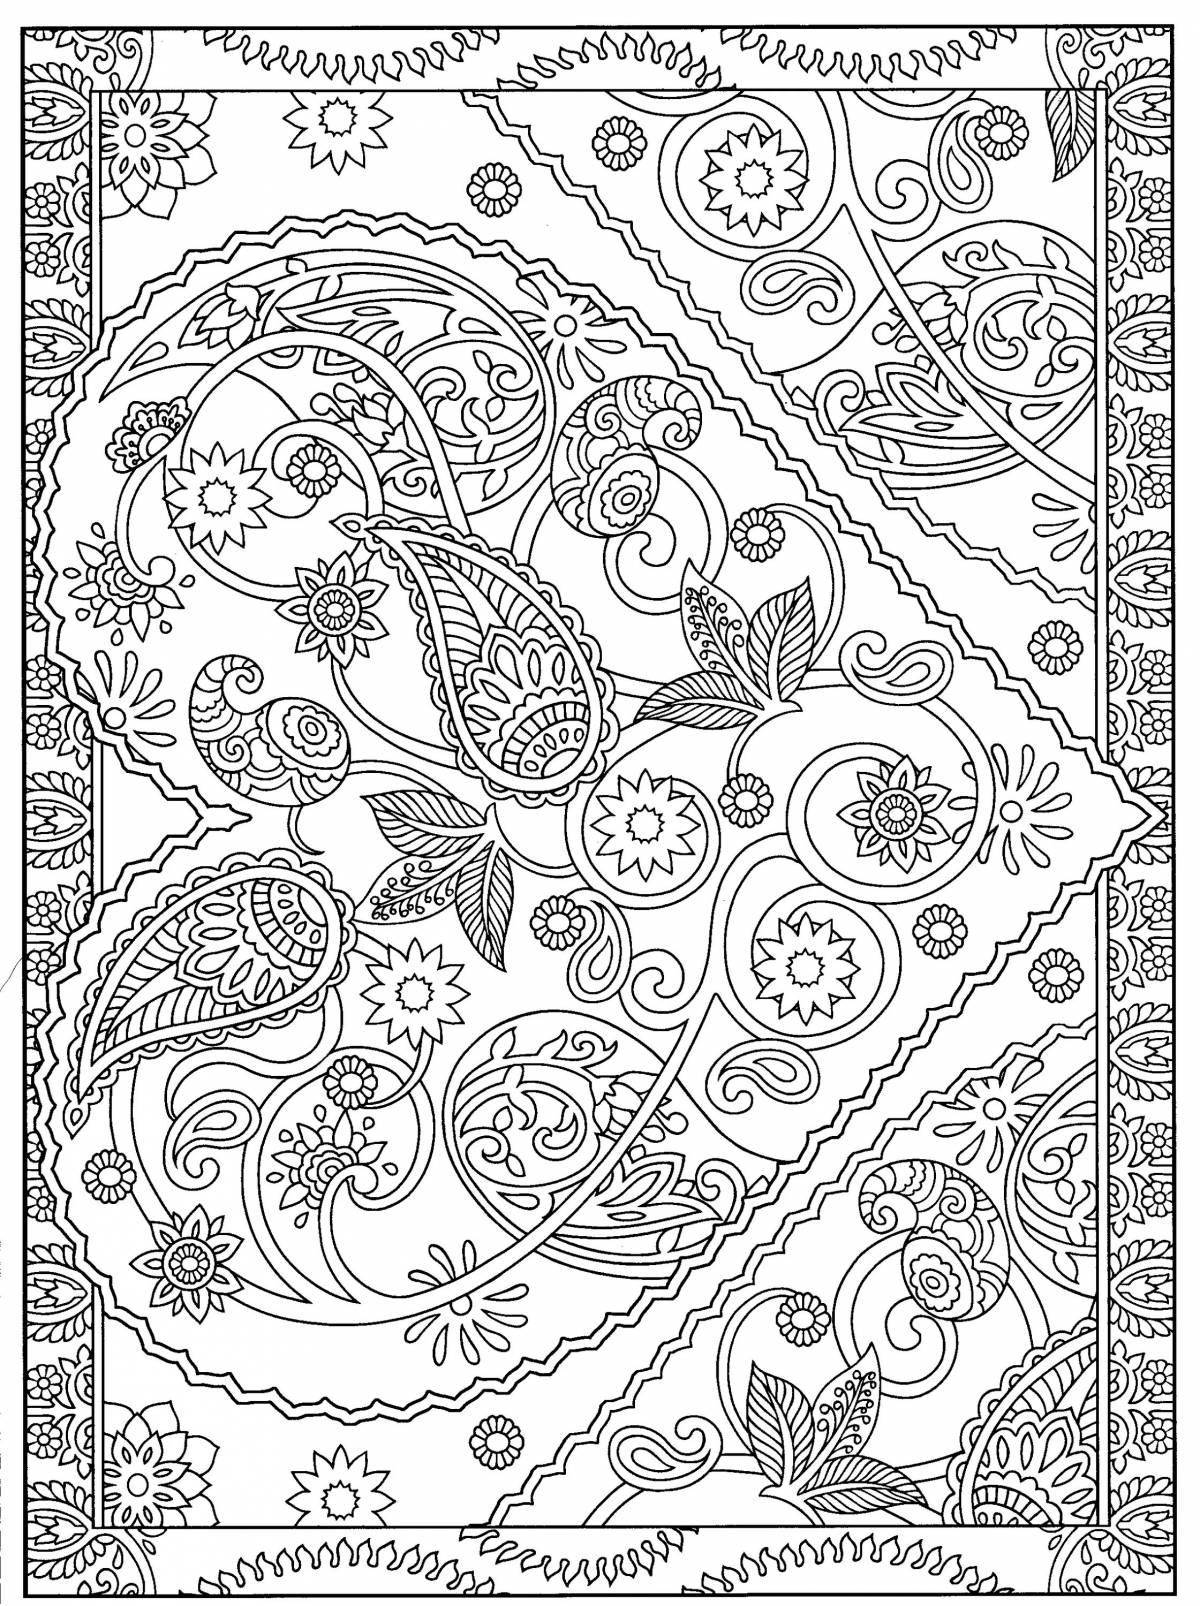 Colorful soothing coloring pages